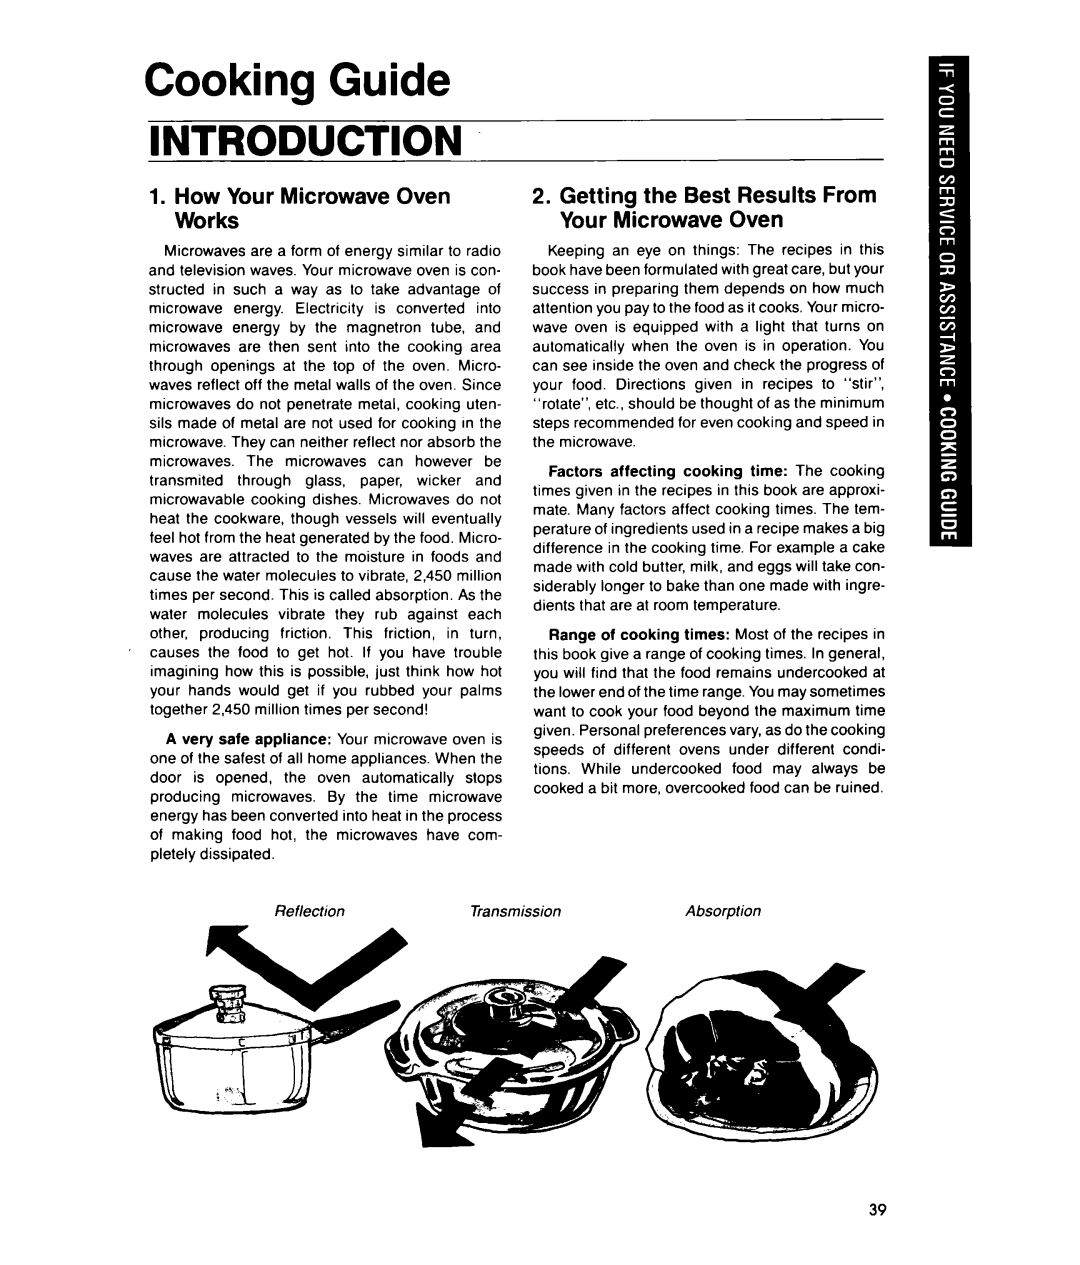 Whirlpool MTZ080XY user manual Cooking Guide, Introduction, How Your Microwave Oven Works 